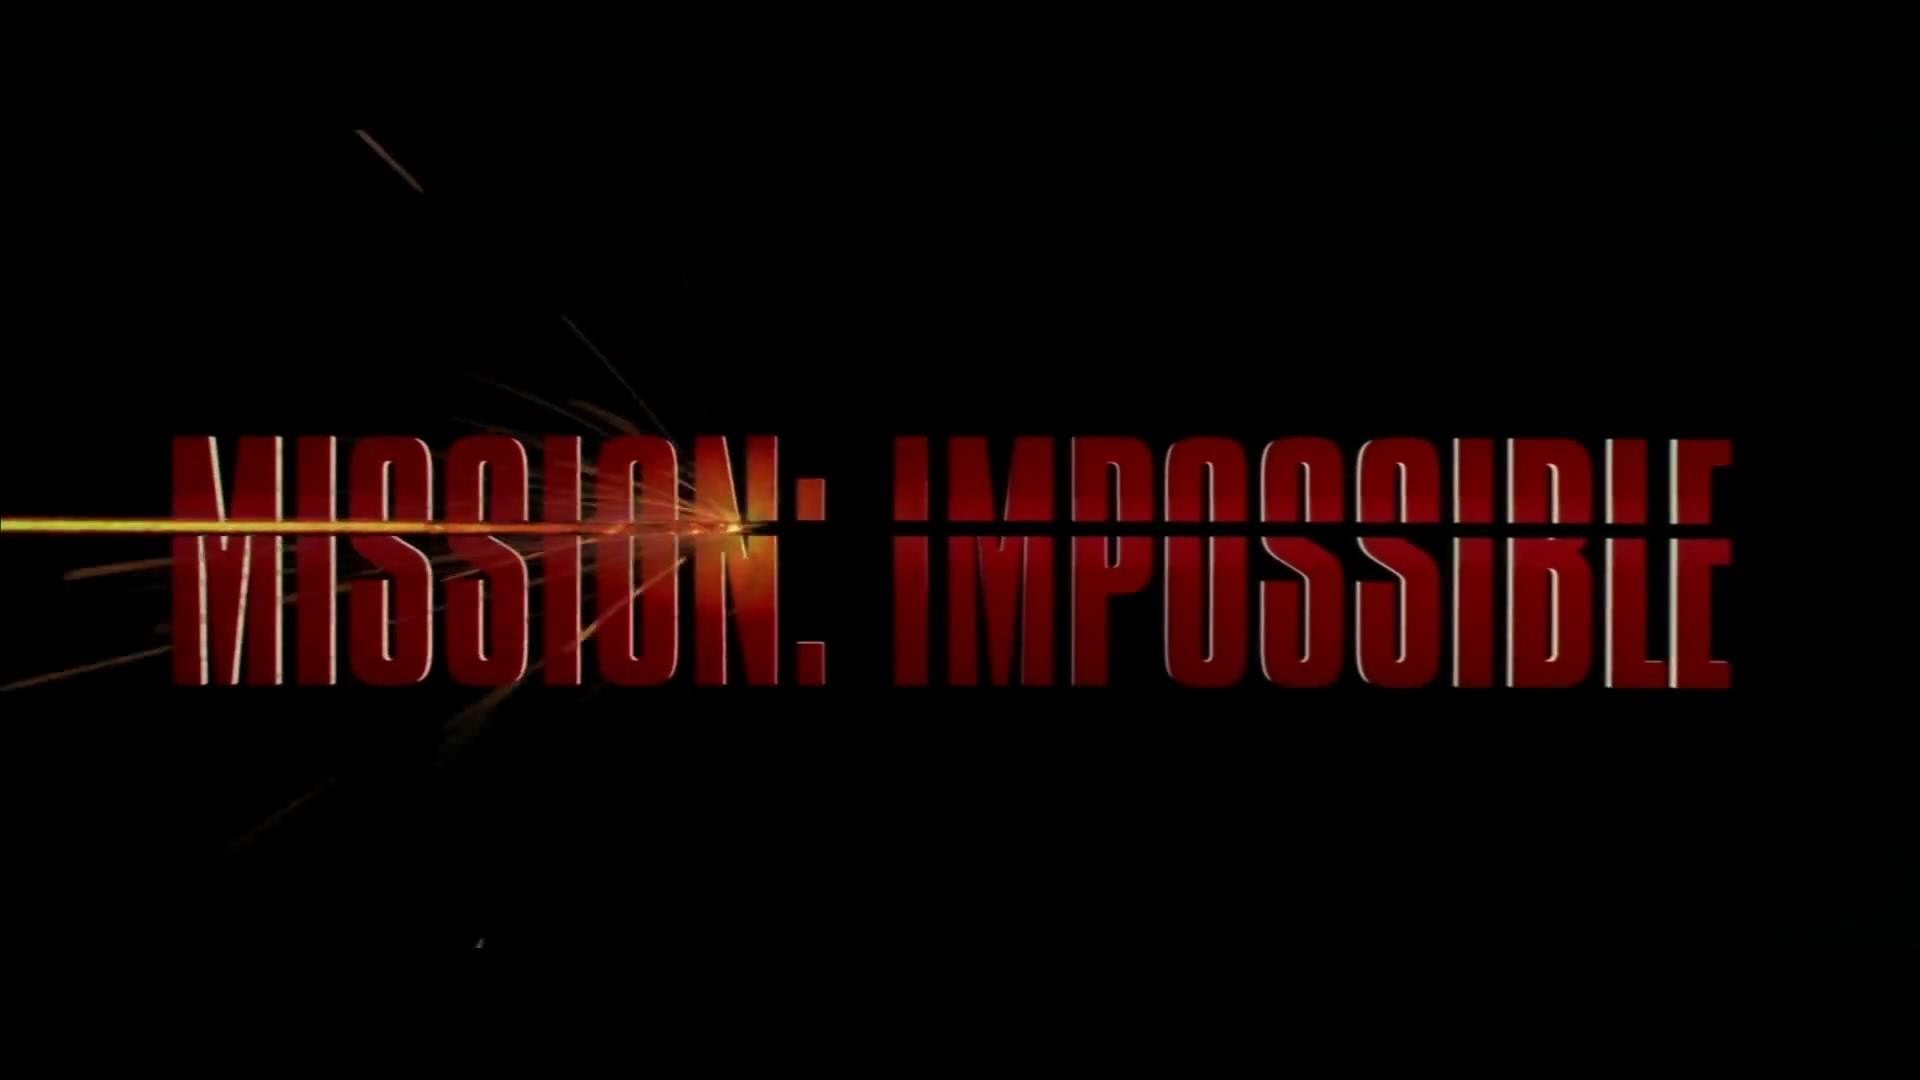 1920x1080 Mission Impossible Wallpapers - LyhyXX.com ...